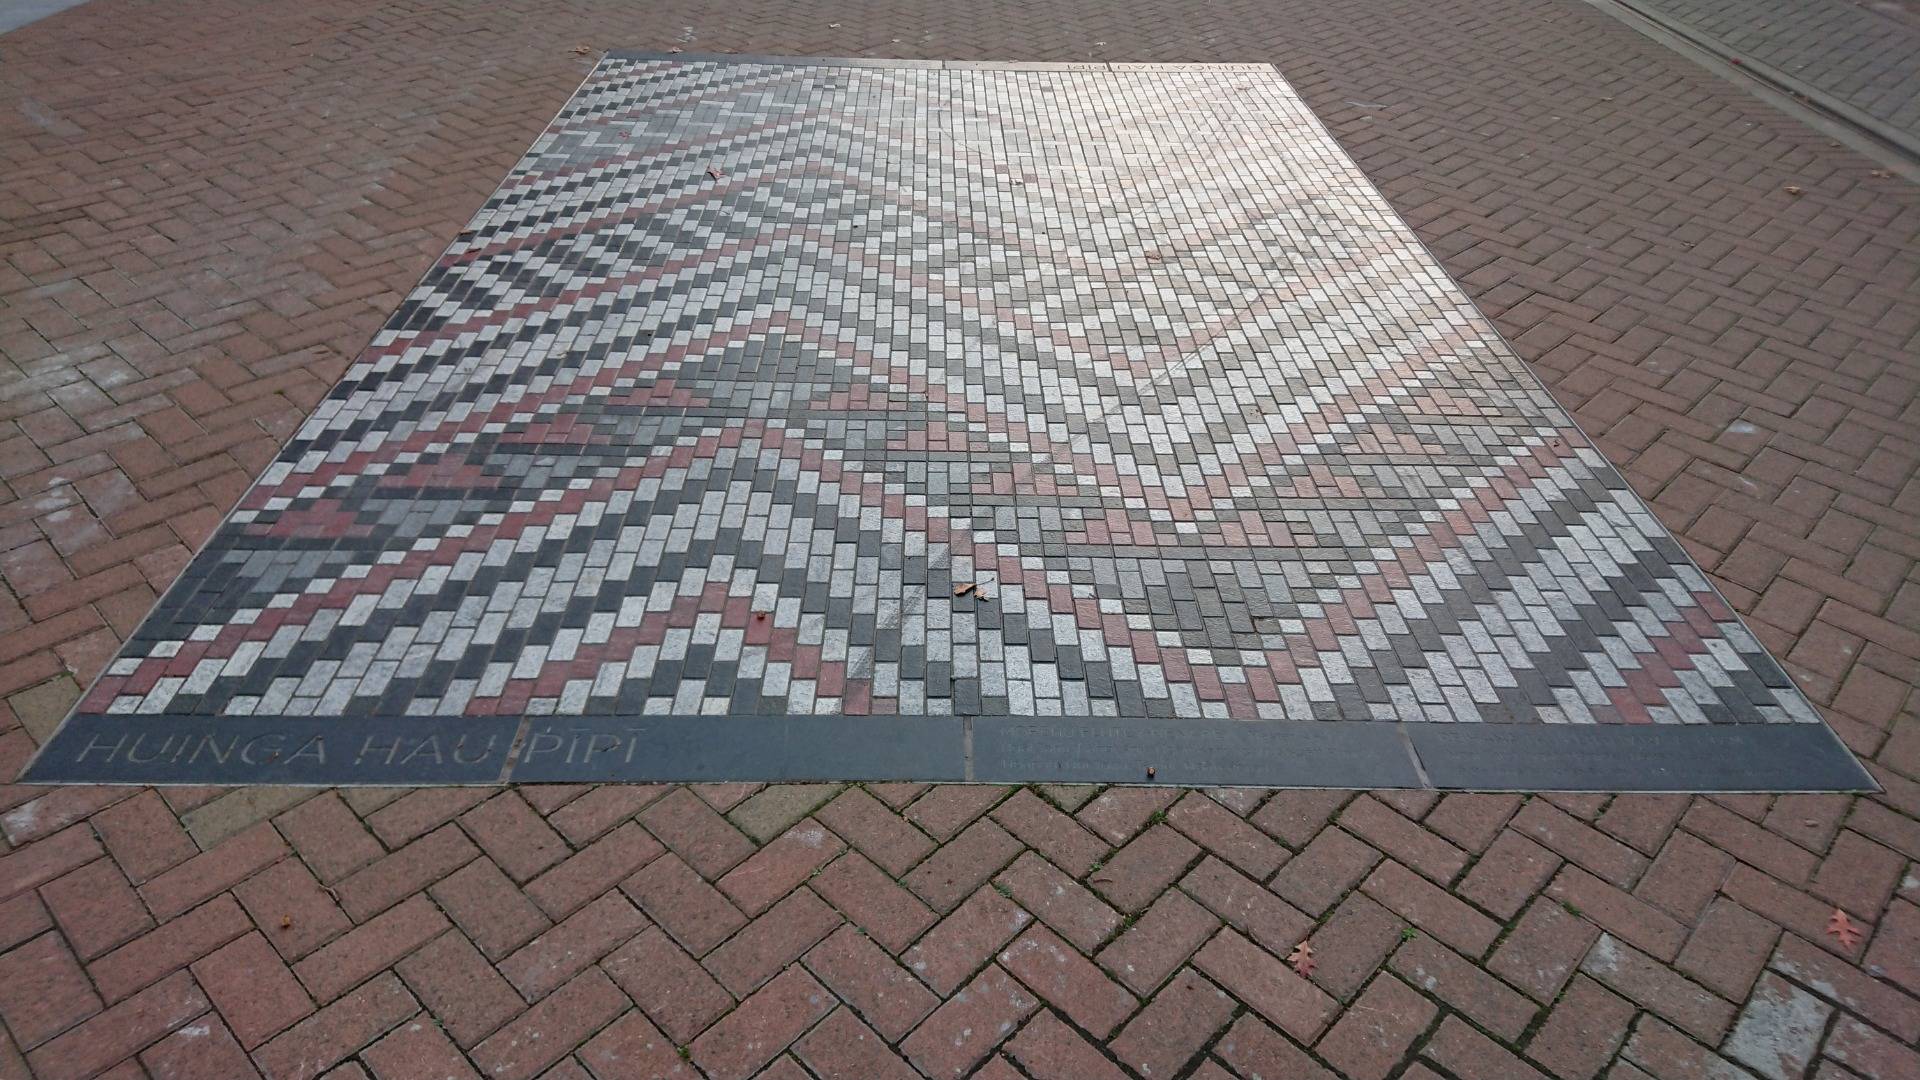 These "Welcome Mats" are dotted around the city on the bricks